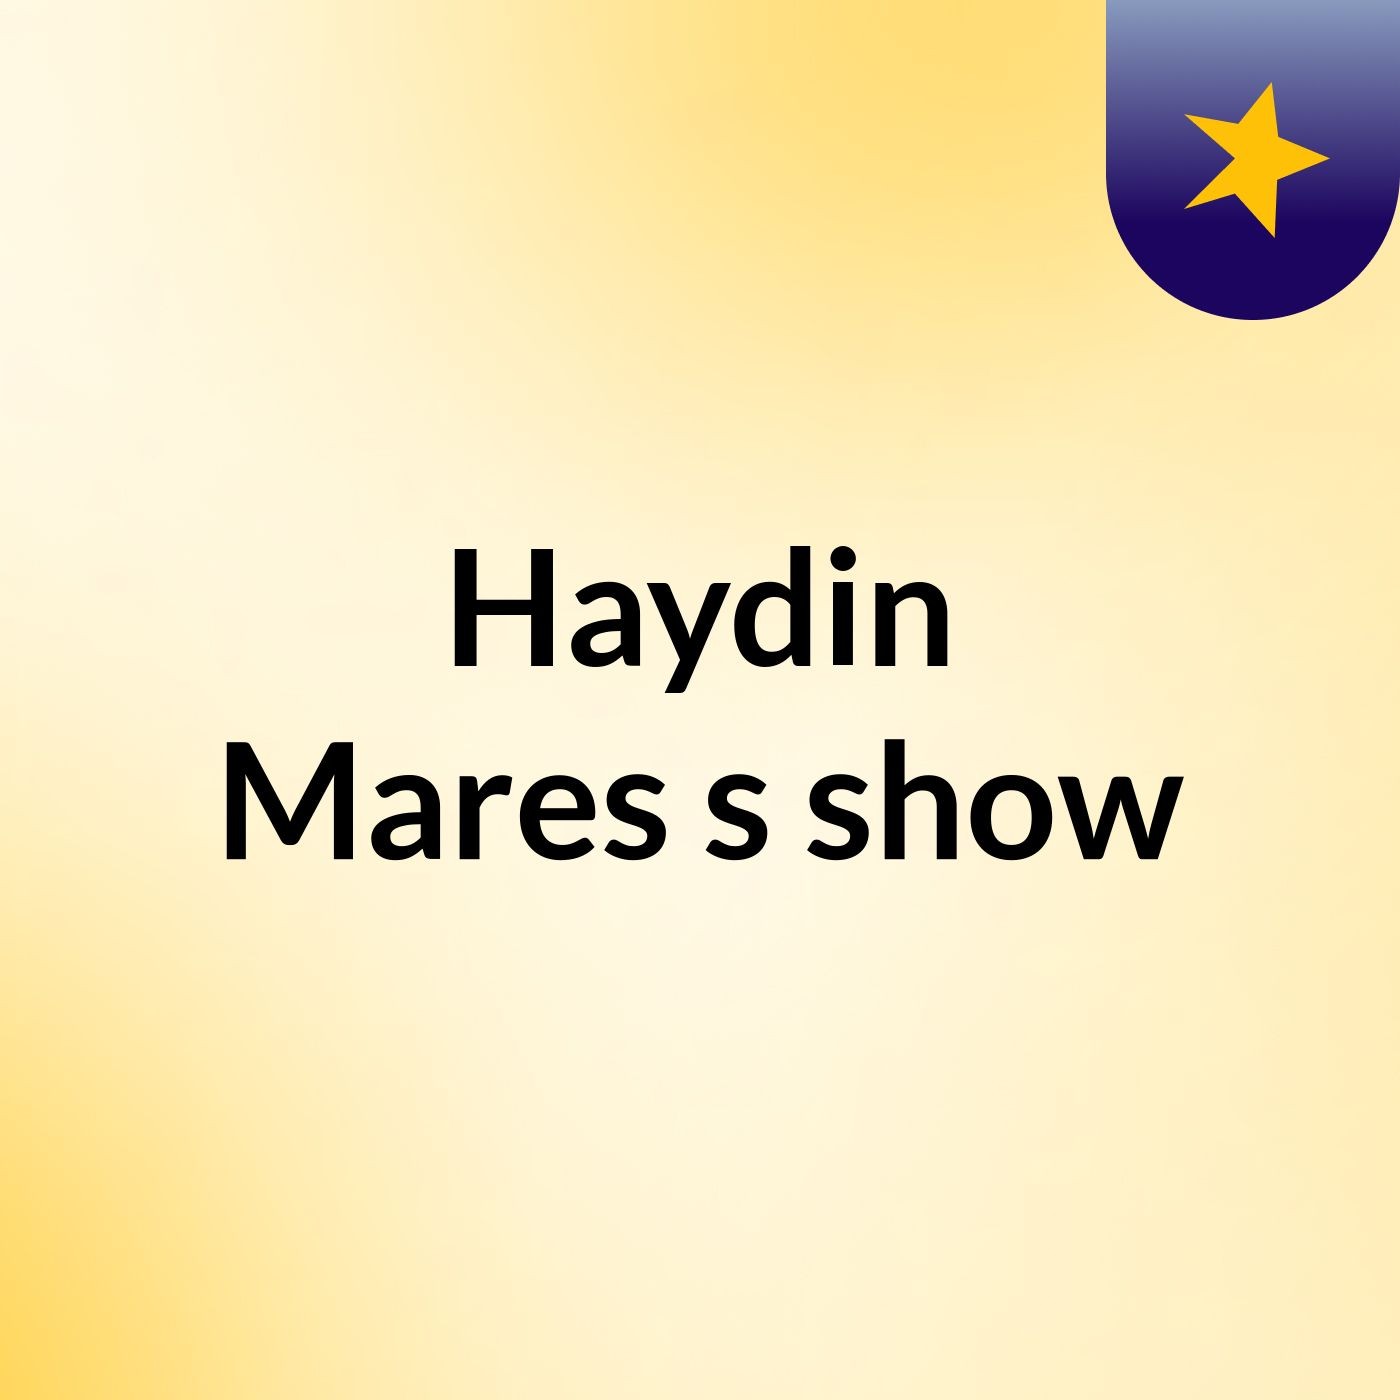 Haydin Mares's show